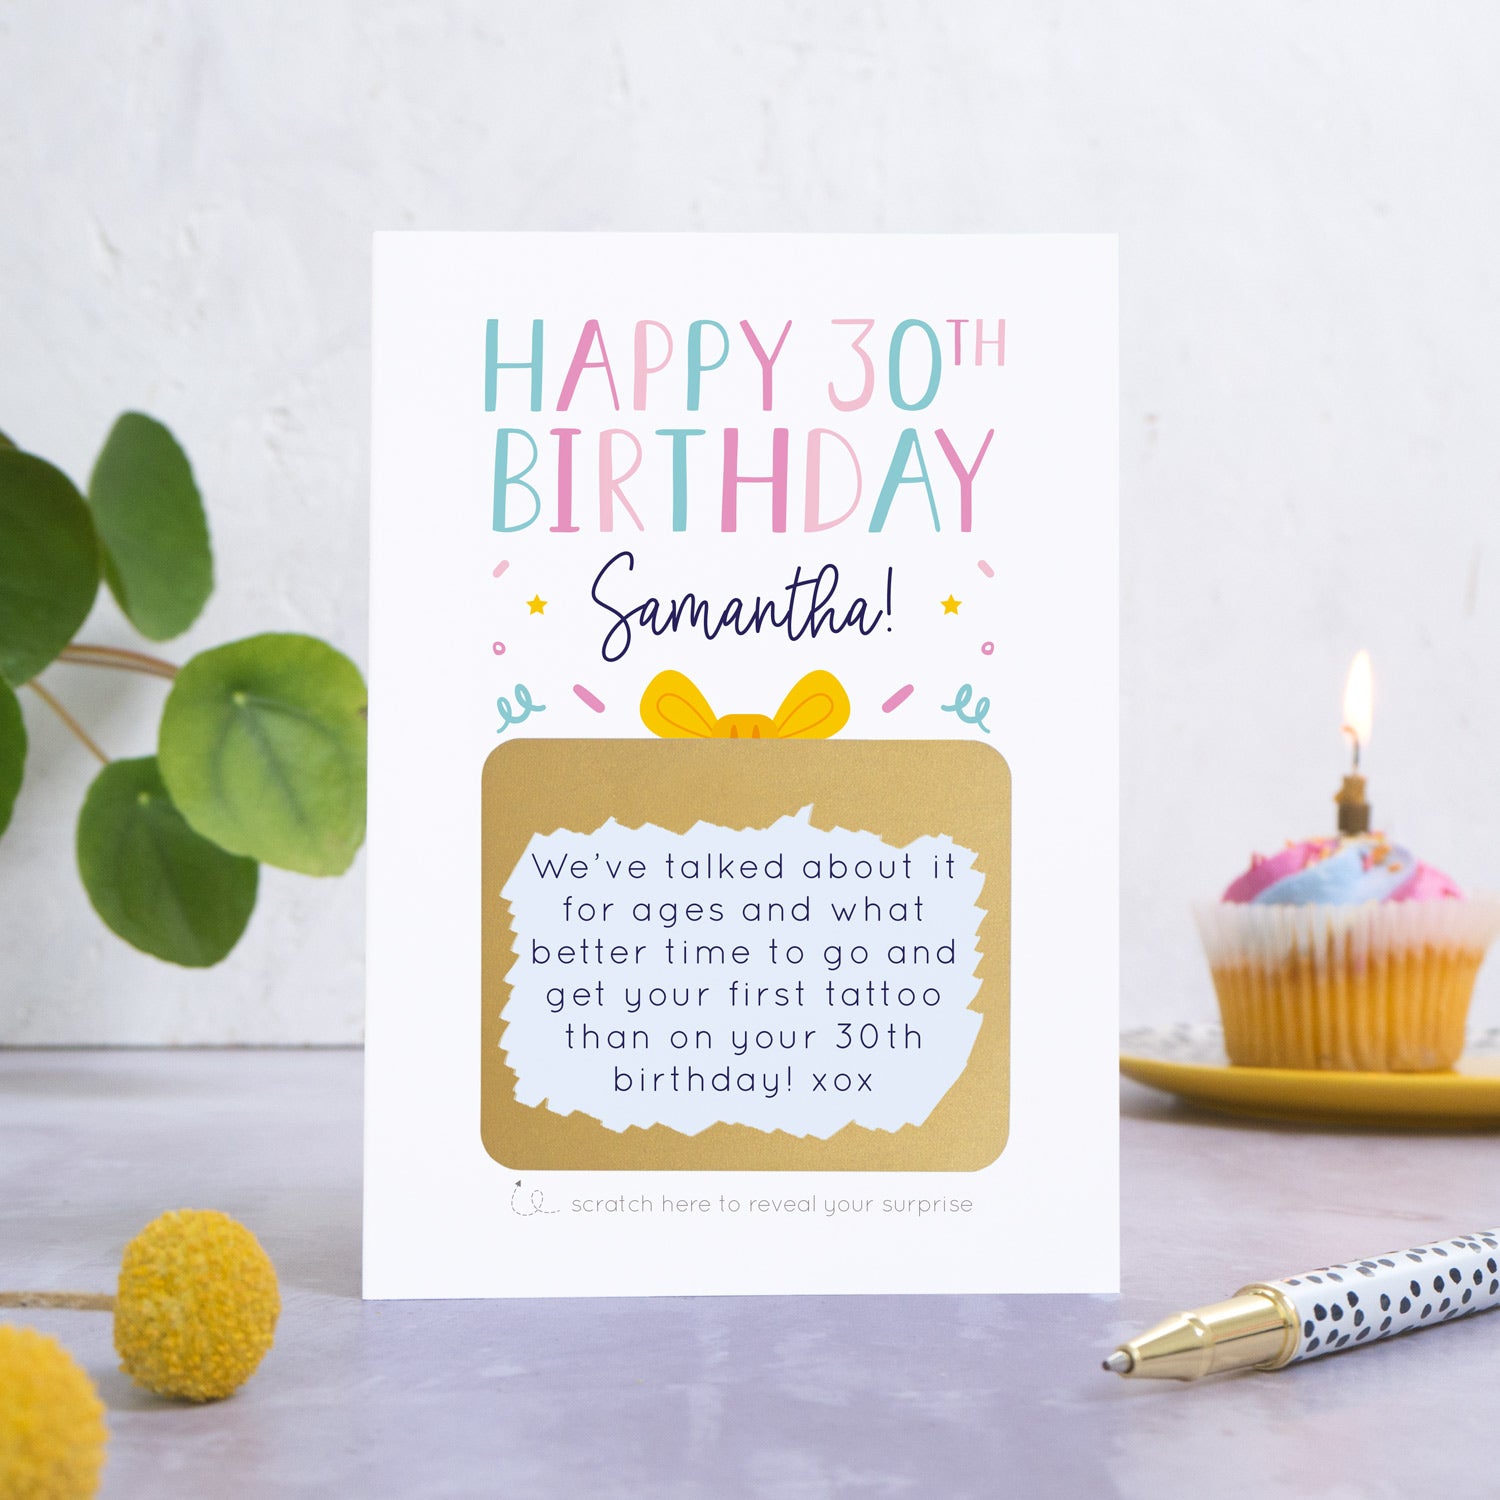 A personalised happy 30th birthday scratch card in pink that has been photographed on a white and grey background. There is foliage and yellow flowers on the left and a cupcake and a pen to the right. The card features the recipients name and a scratch panel that has been scratched off revealing a personalised message.